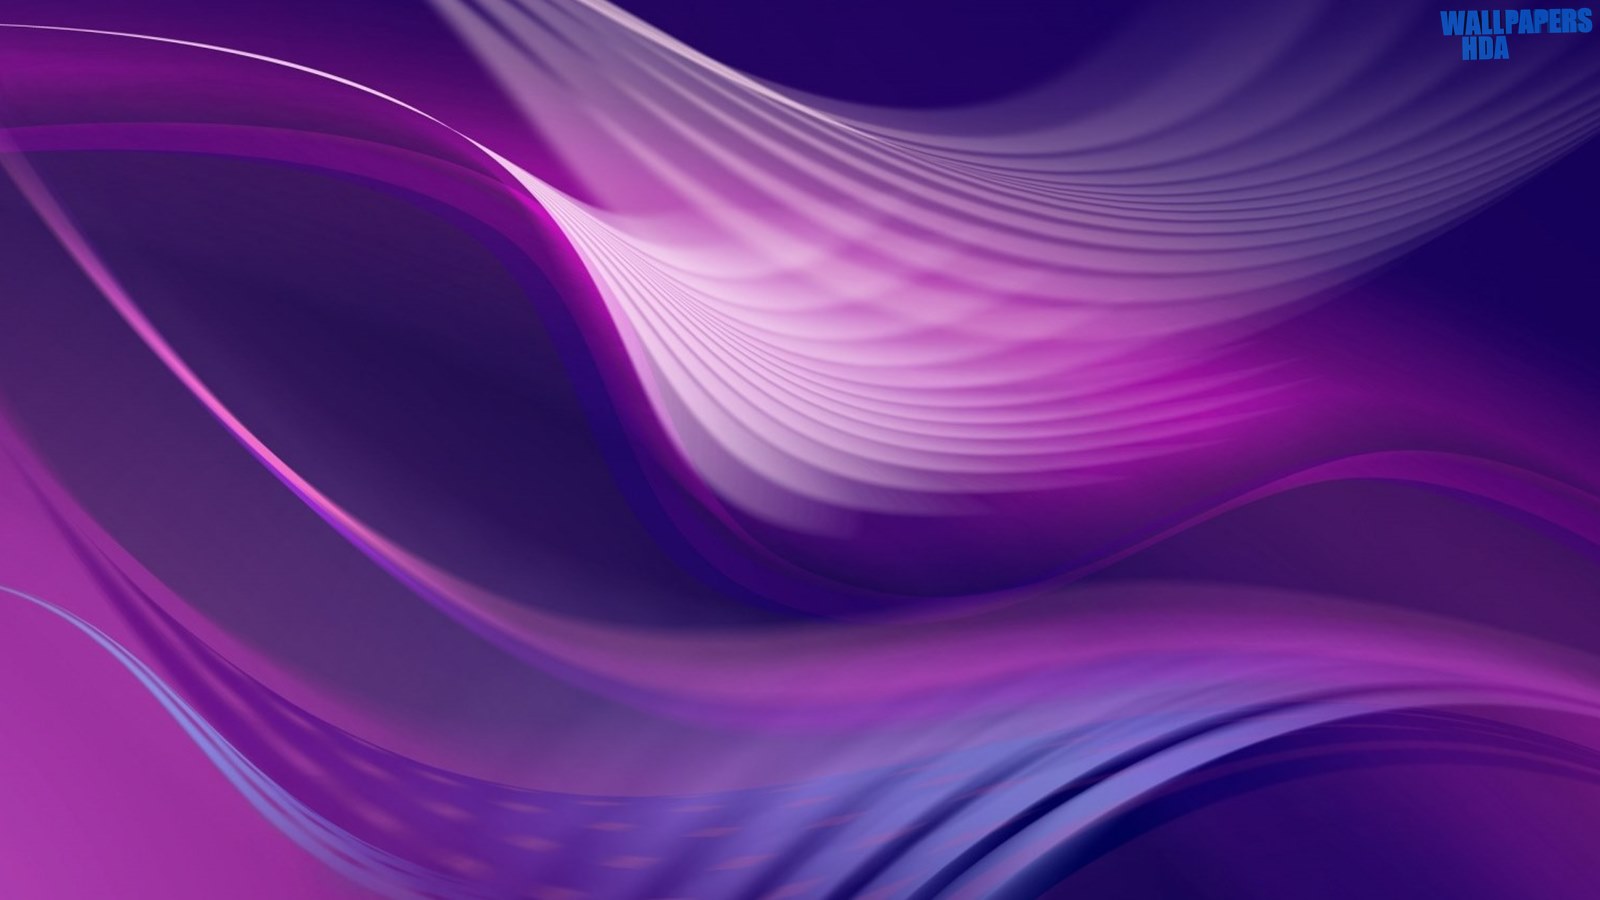 Abstract graphic design wallpaper 1600x900